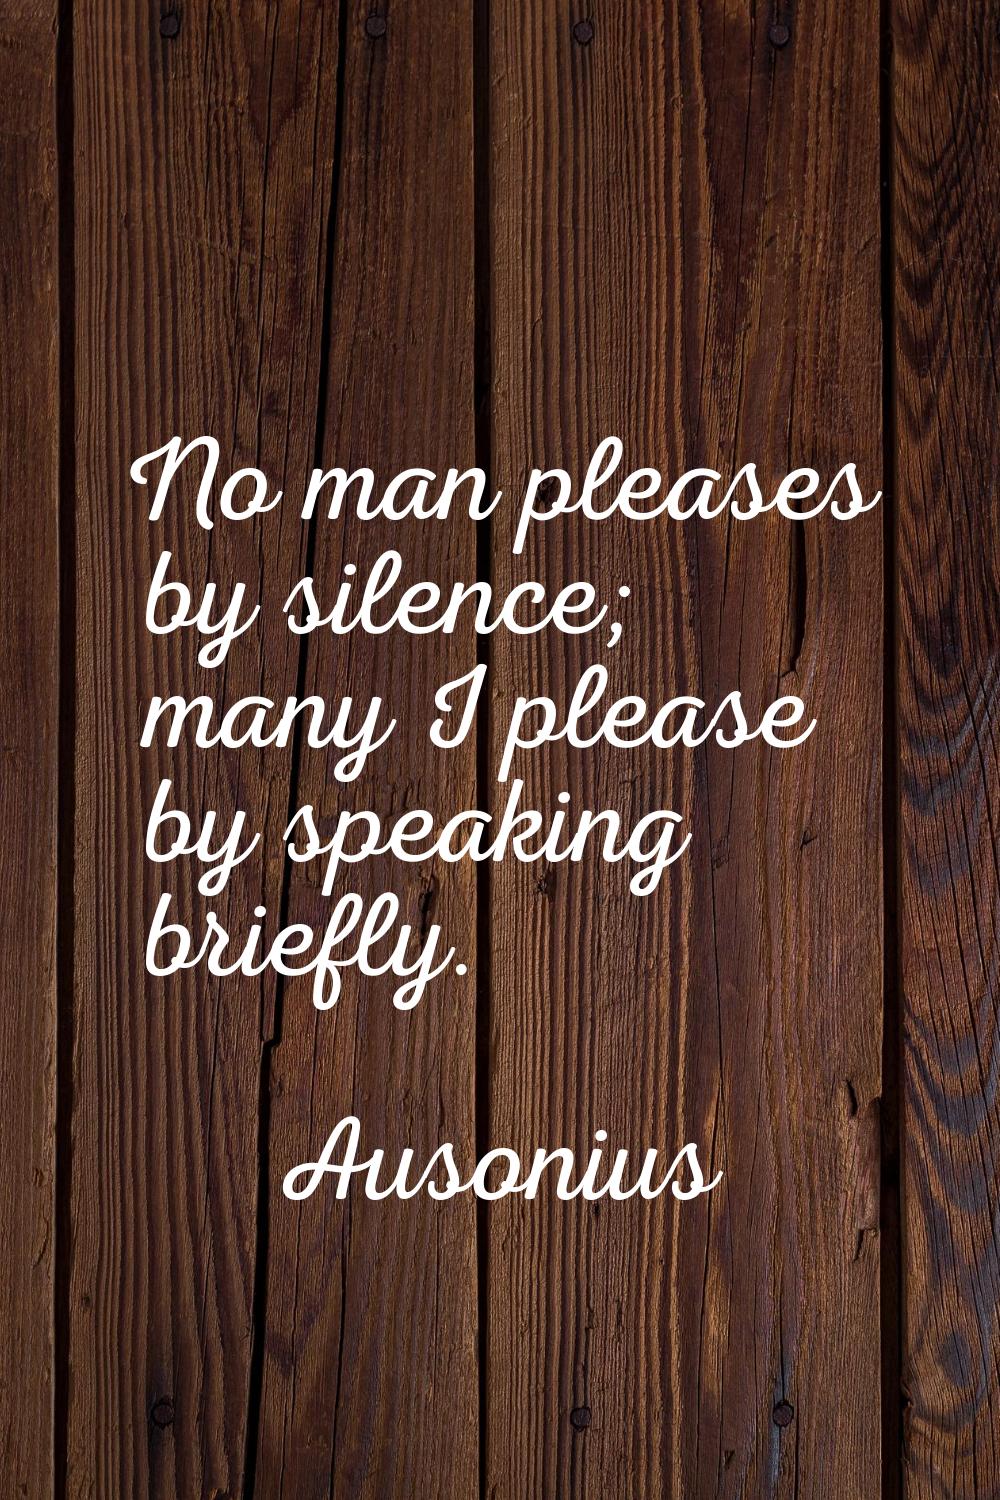 No man pleases by silence; many I please by speaking briefly.